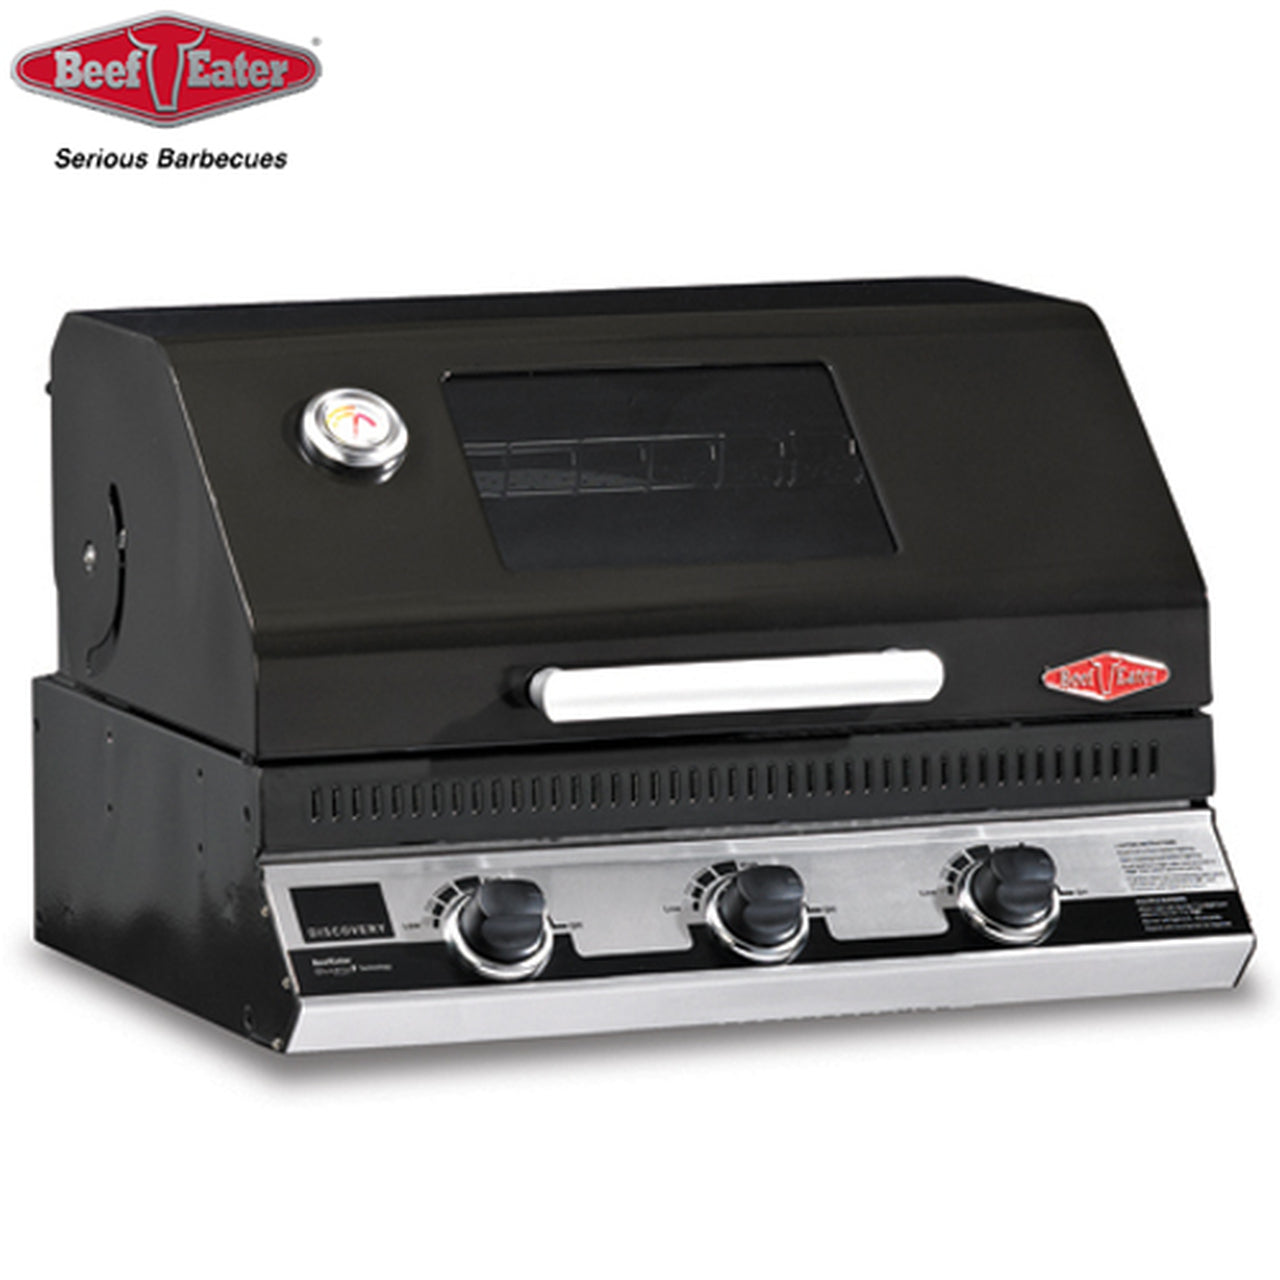 Beefeater Discovery 1100e Built-in 3 Burner Gas Bbq